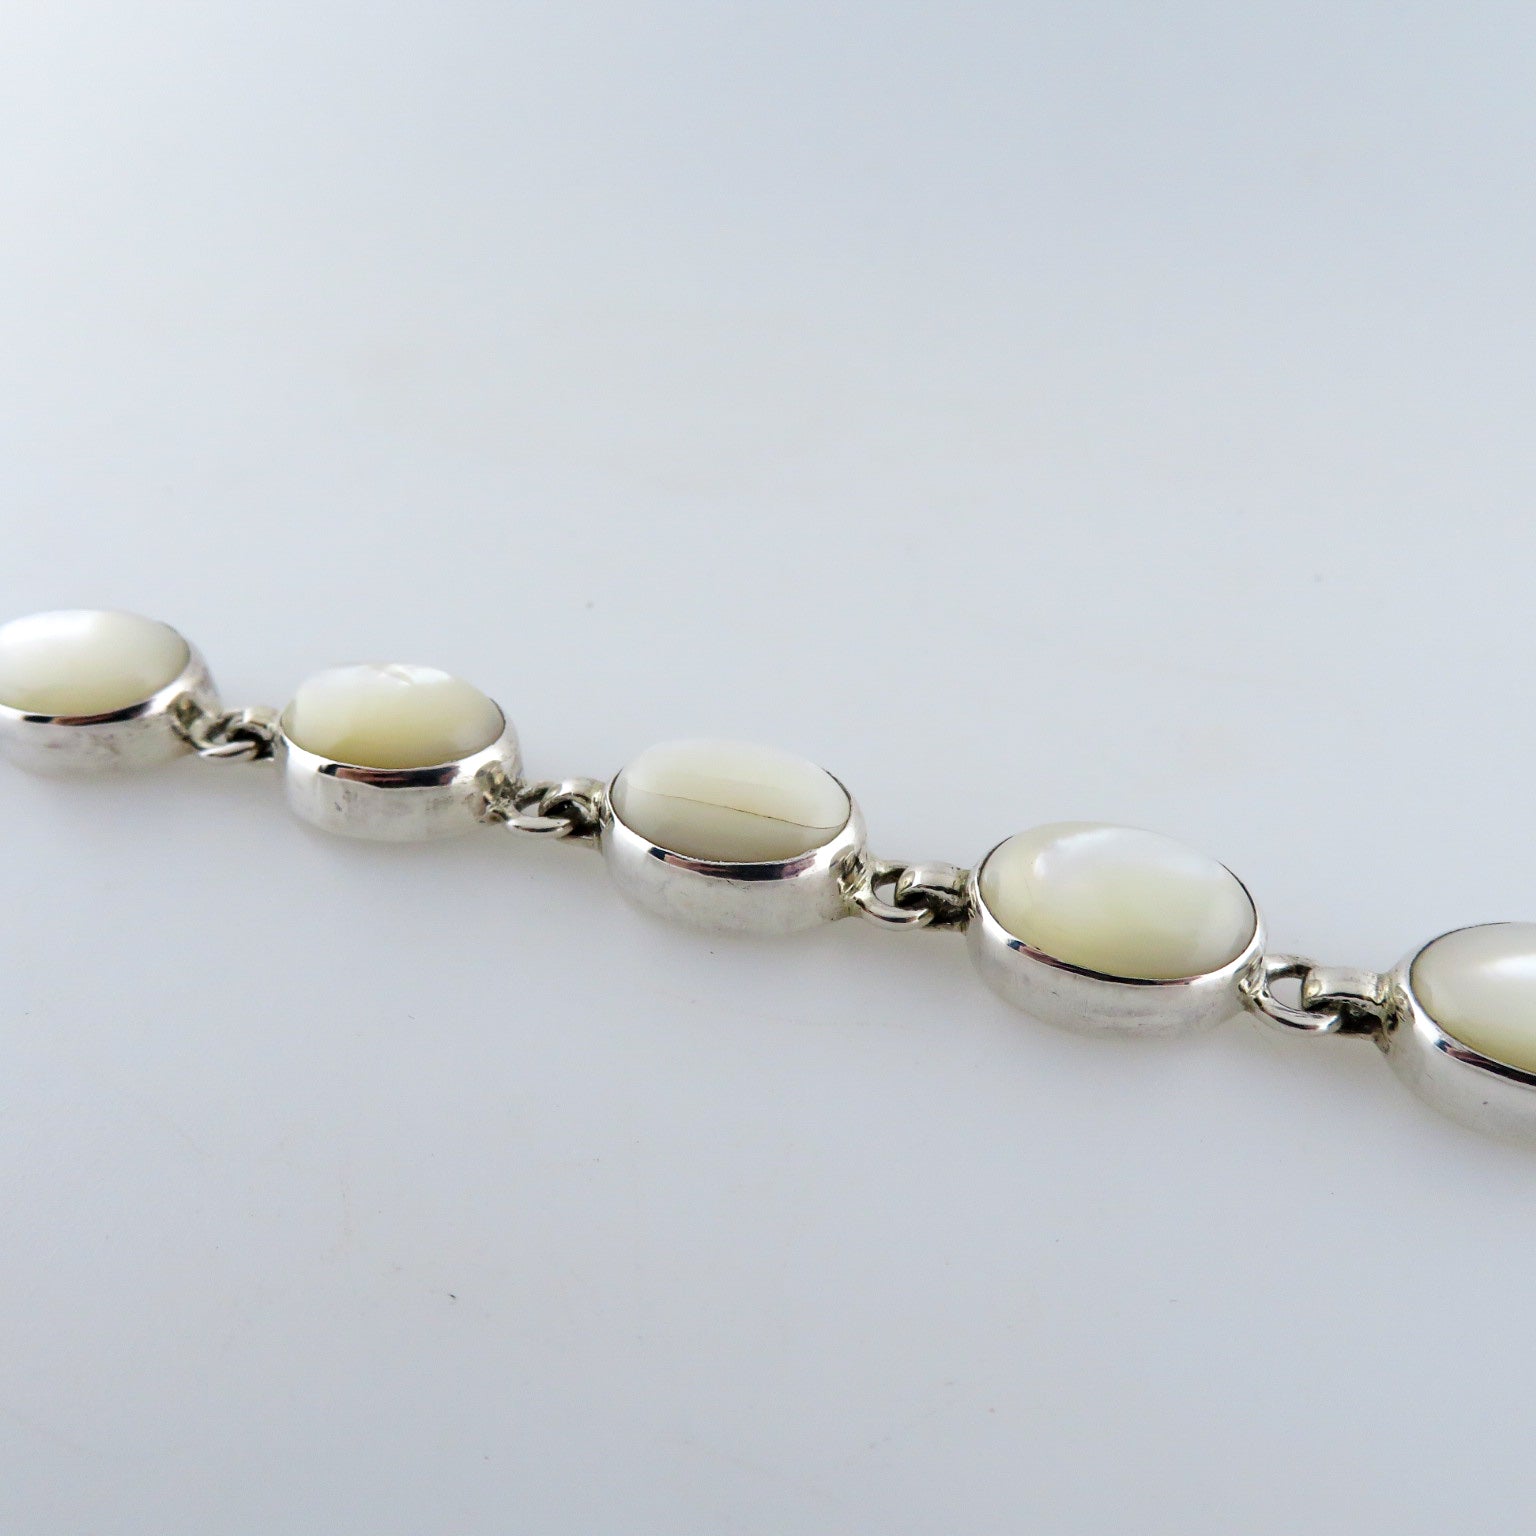 Mother of Pearl Bracelet with Sterling Silver